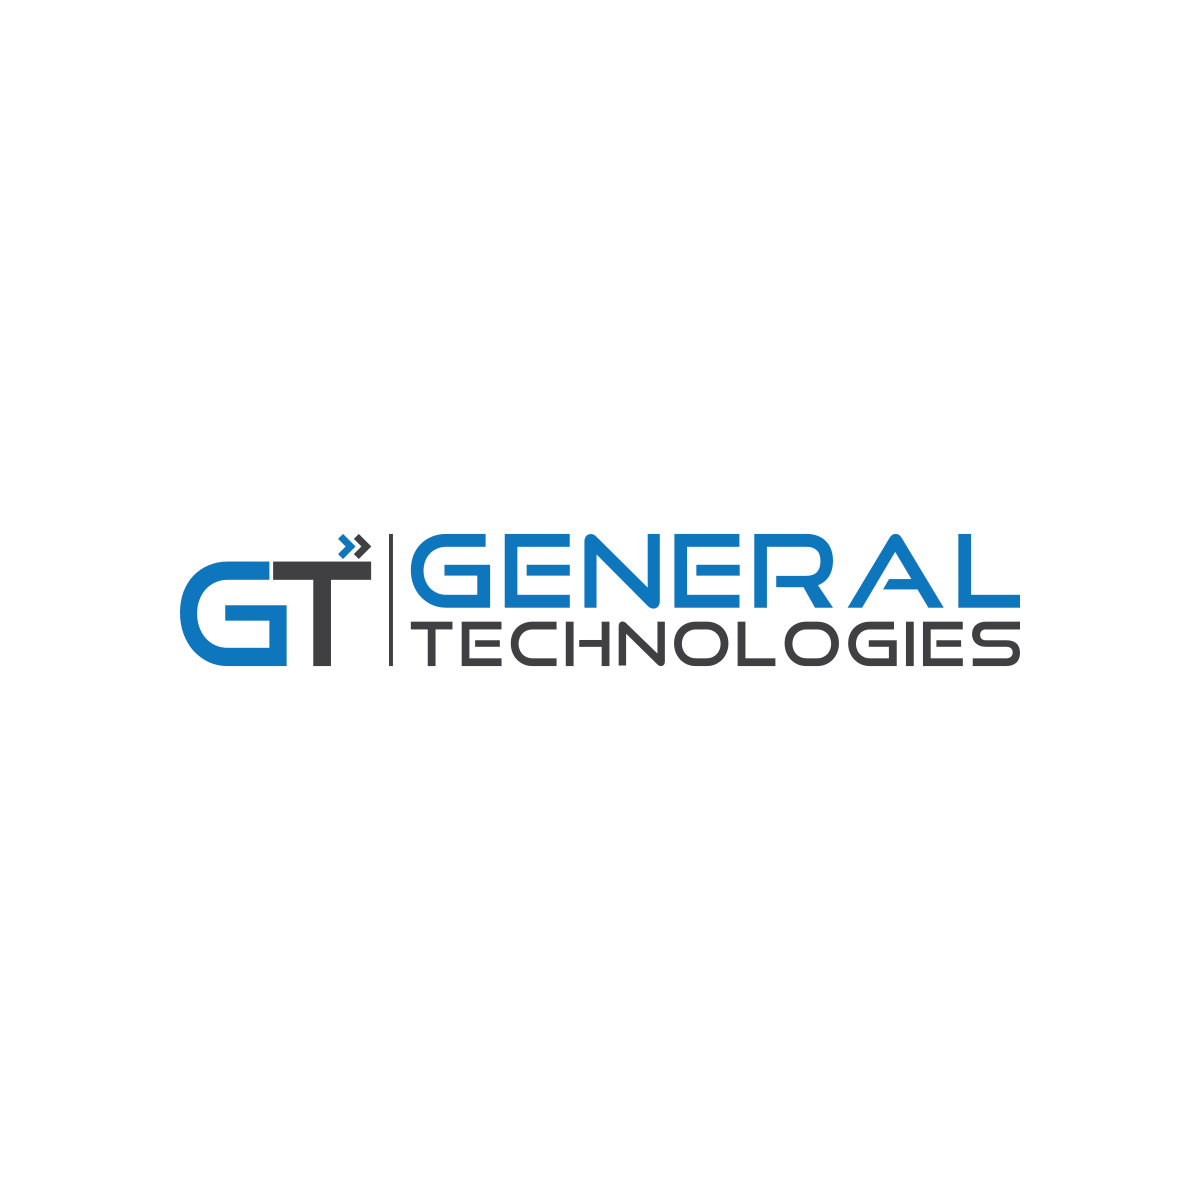 General Technologies profile on Qualified.One